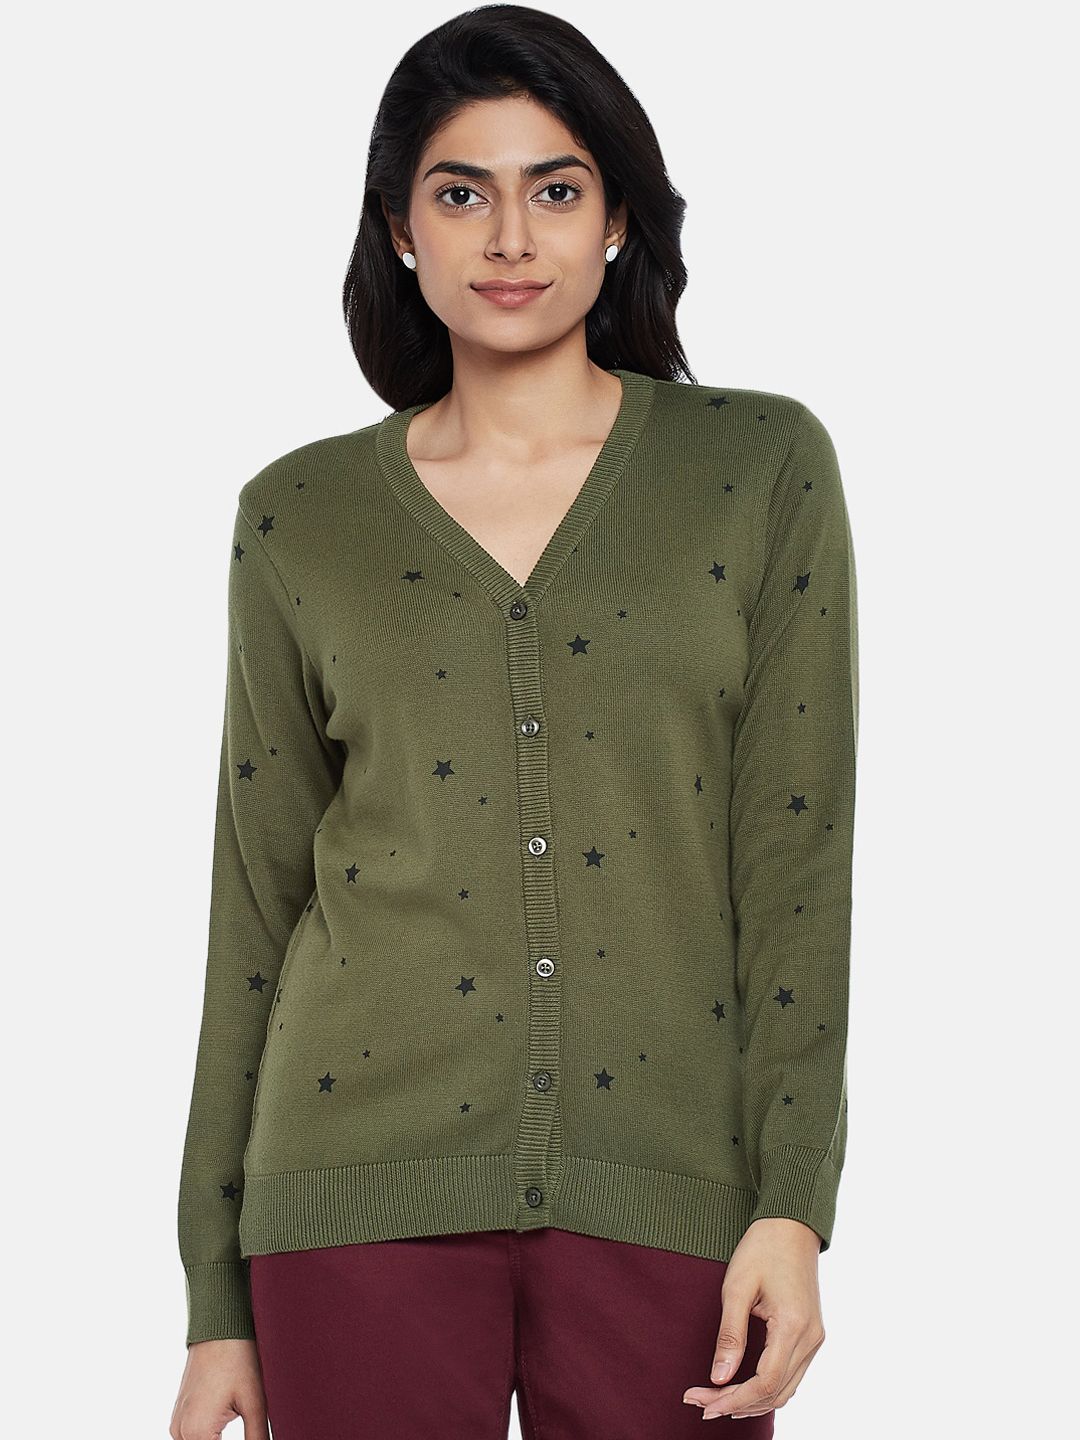 Honey by Pantaloons Women Olive Green Printed Cardigan Sweater Price in India